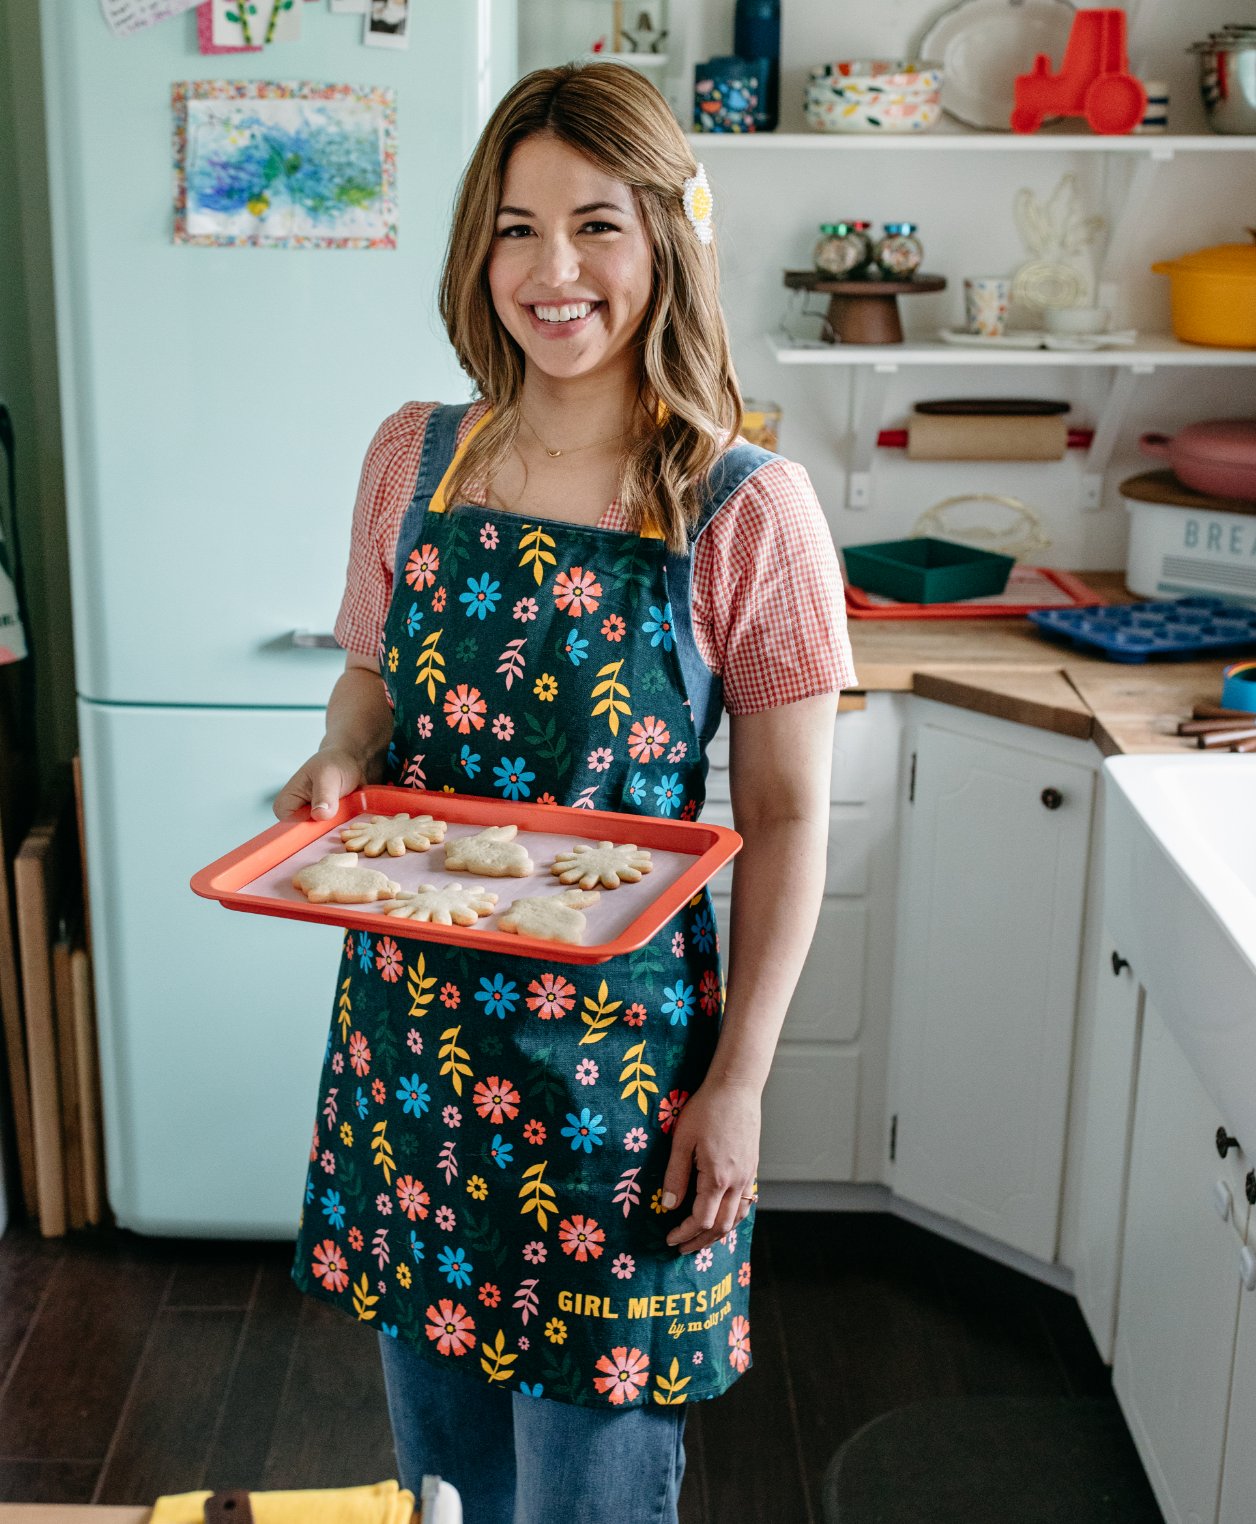  Girl Meets Farm-By -Molly Yeh 